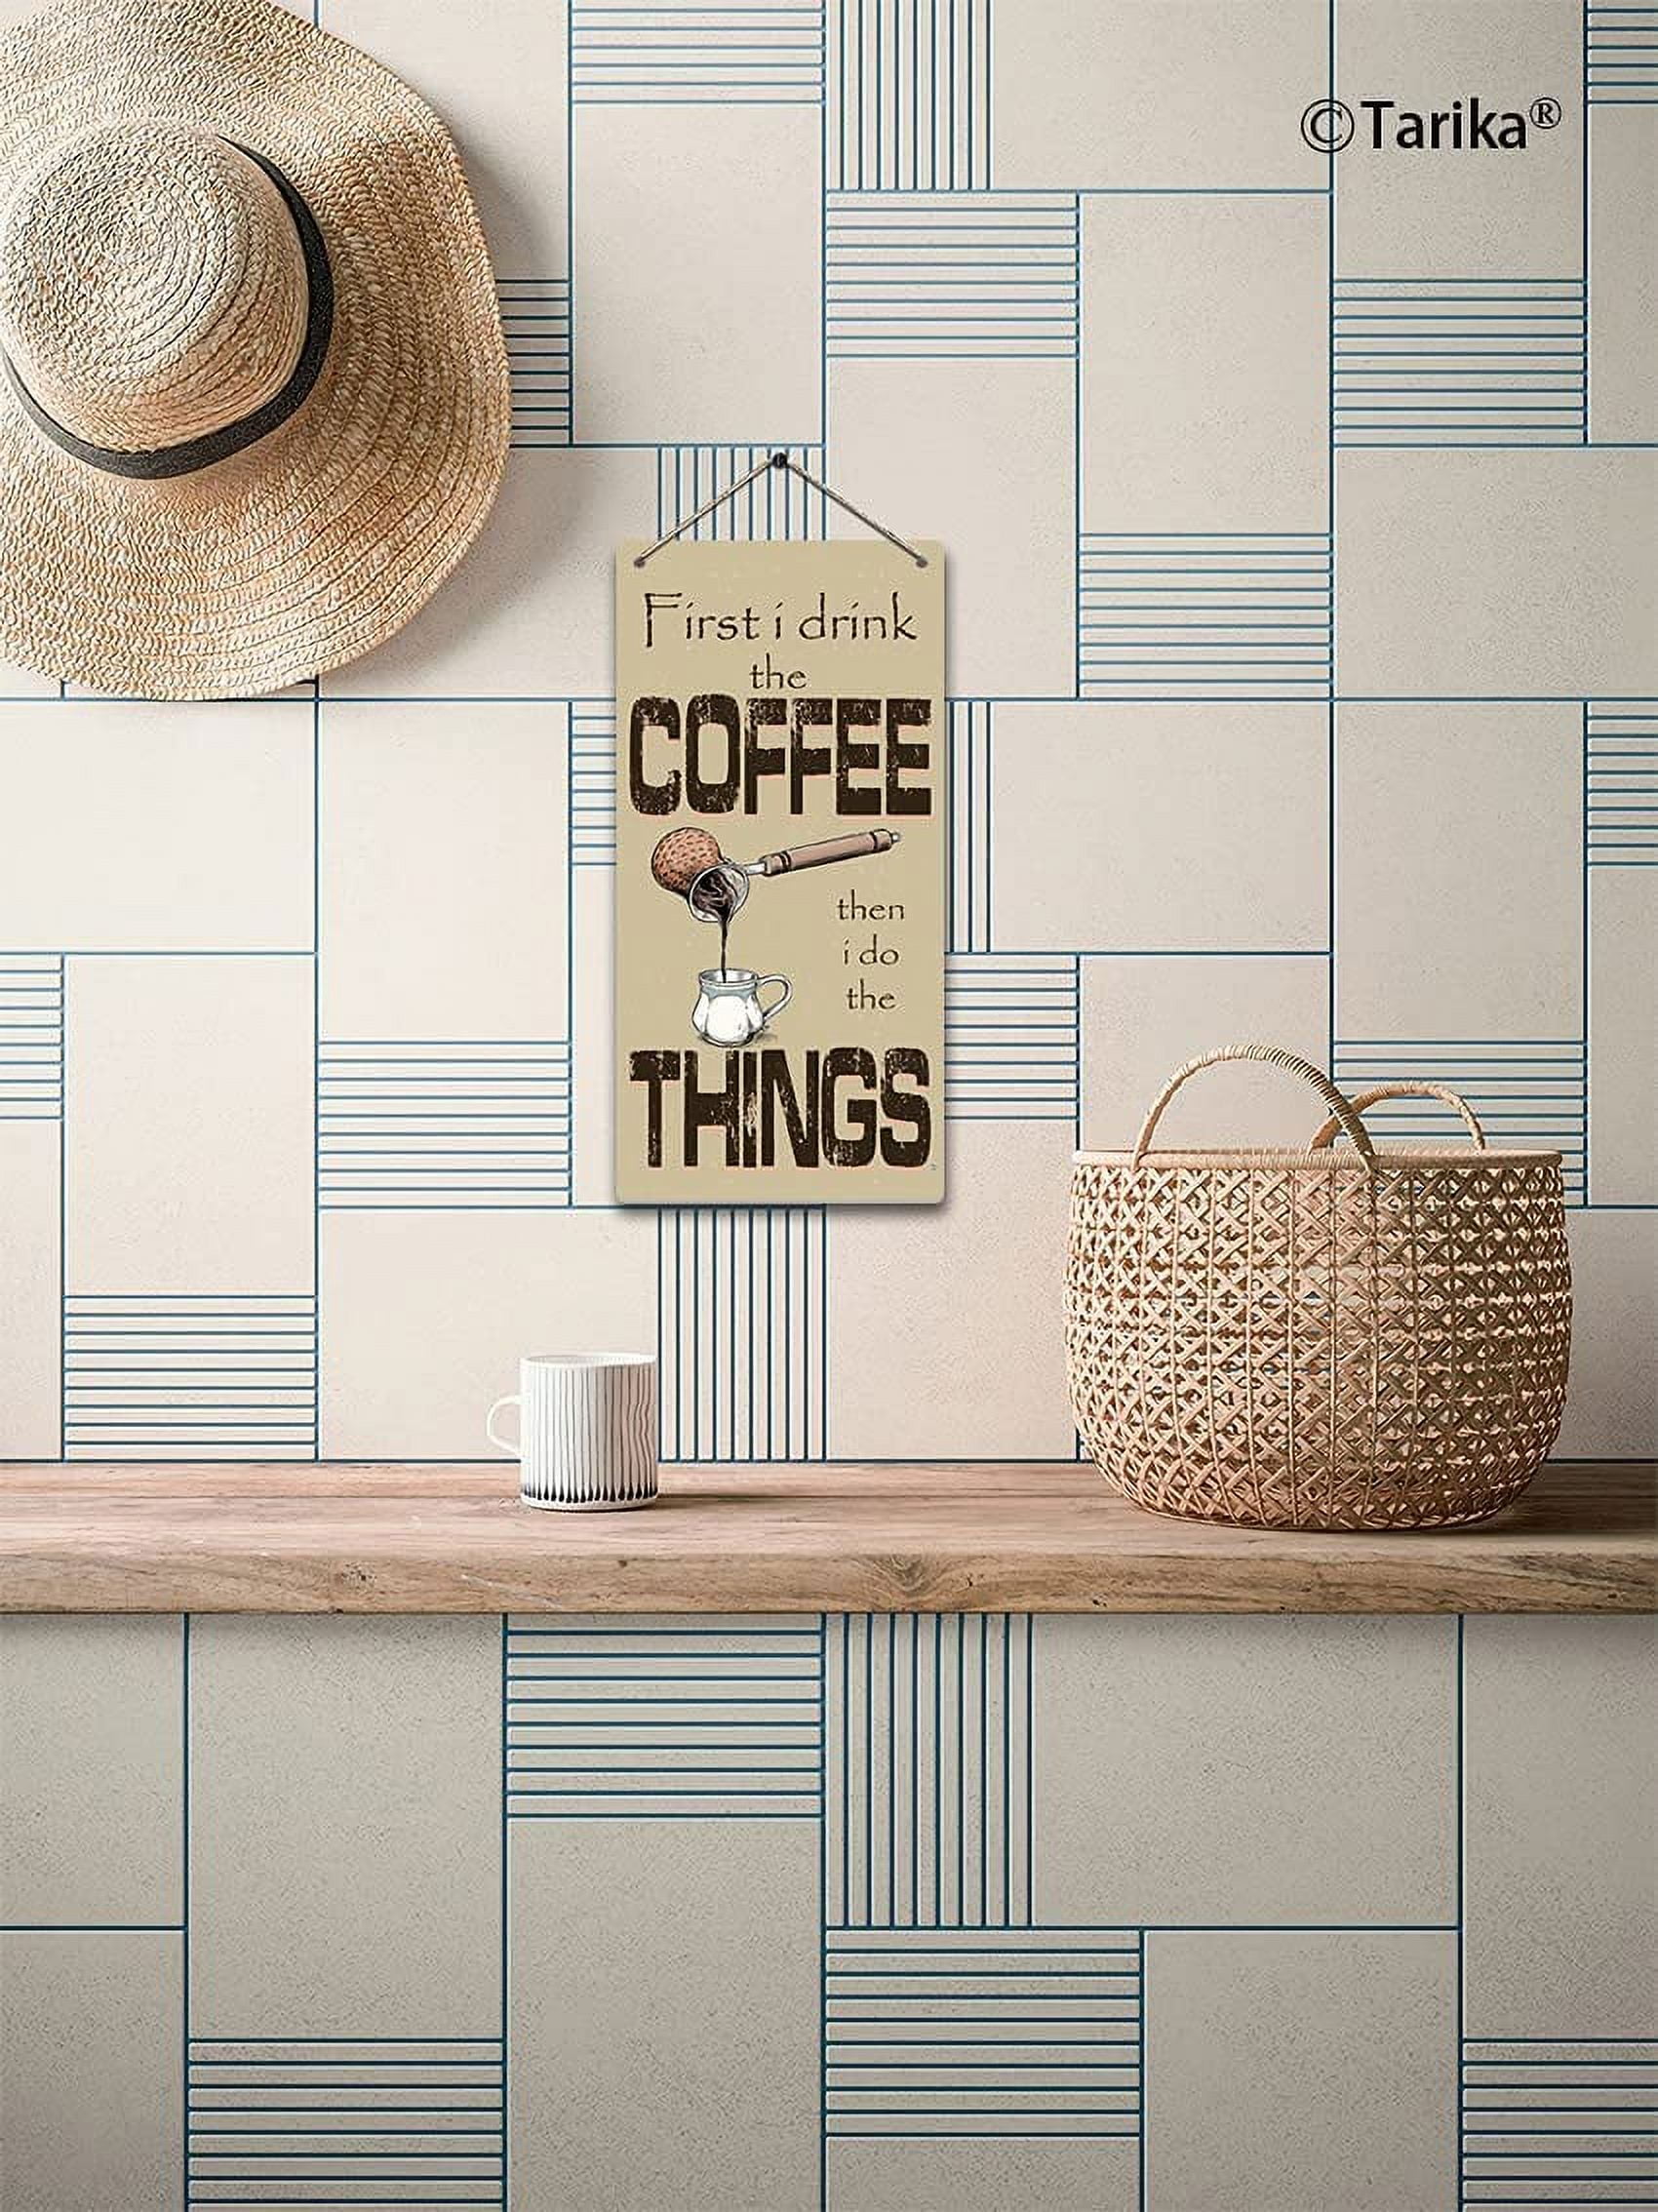 Coffee Bar Open Daily Cafe Decor Wood Hanging Plaque 5x10 Inch Coffee Signs  Modern Bar Accessories Kitchen Home Pub Shop Coffee Station Farmhouse Deco